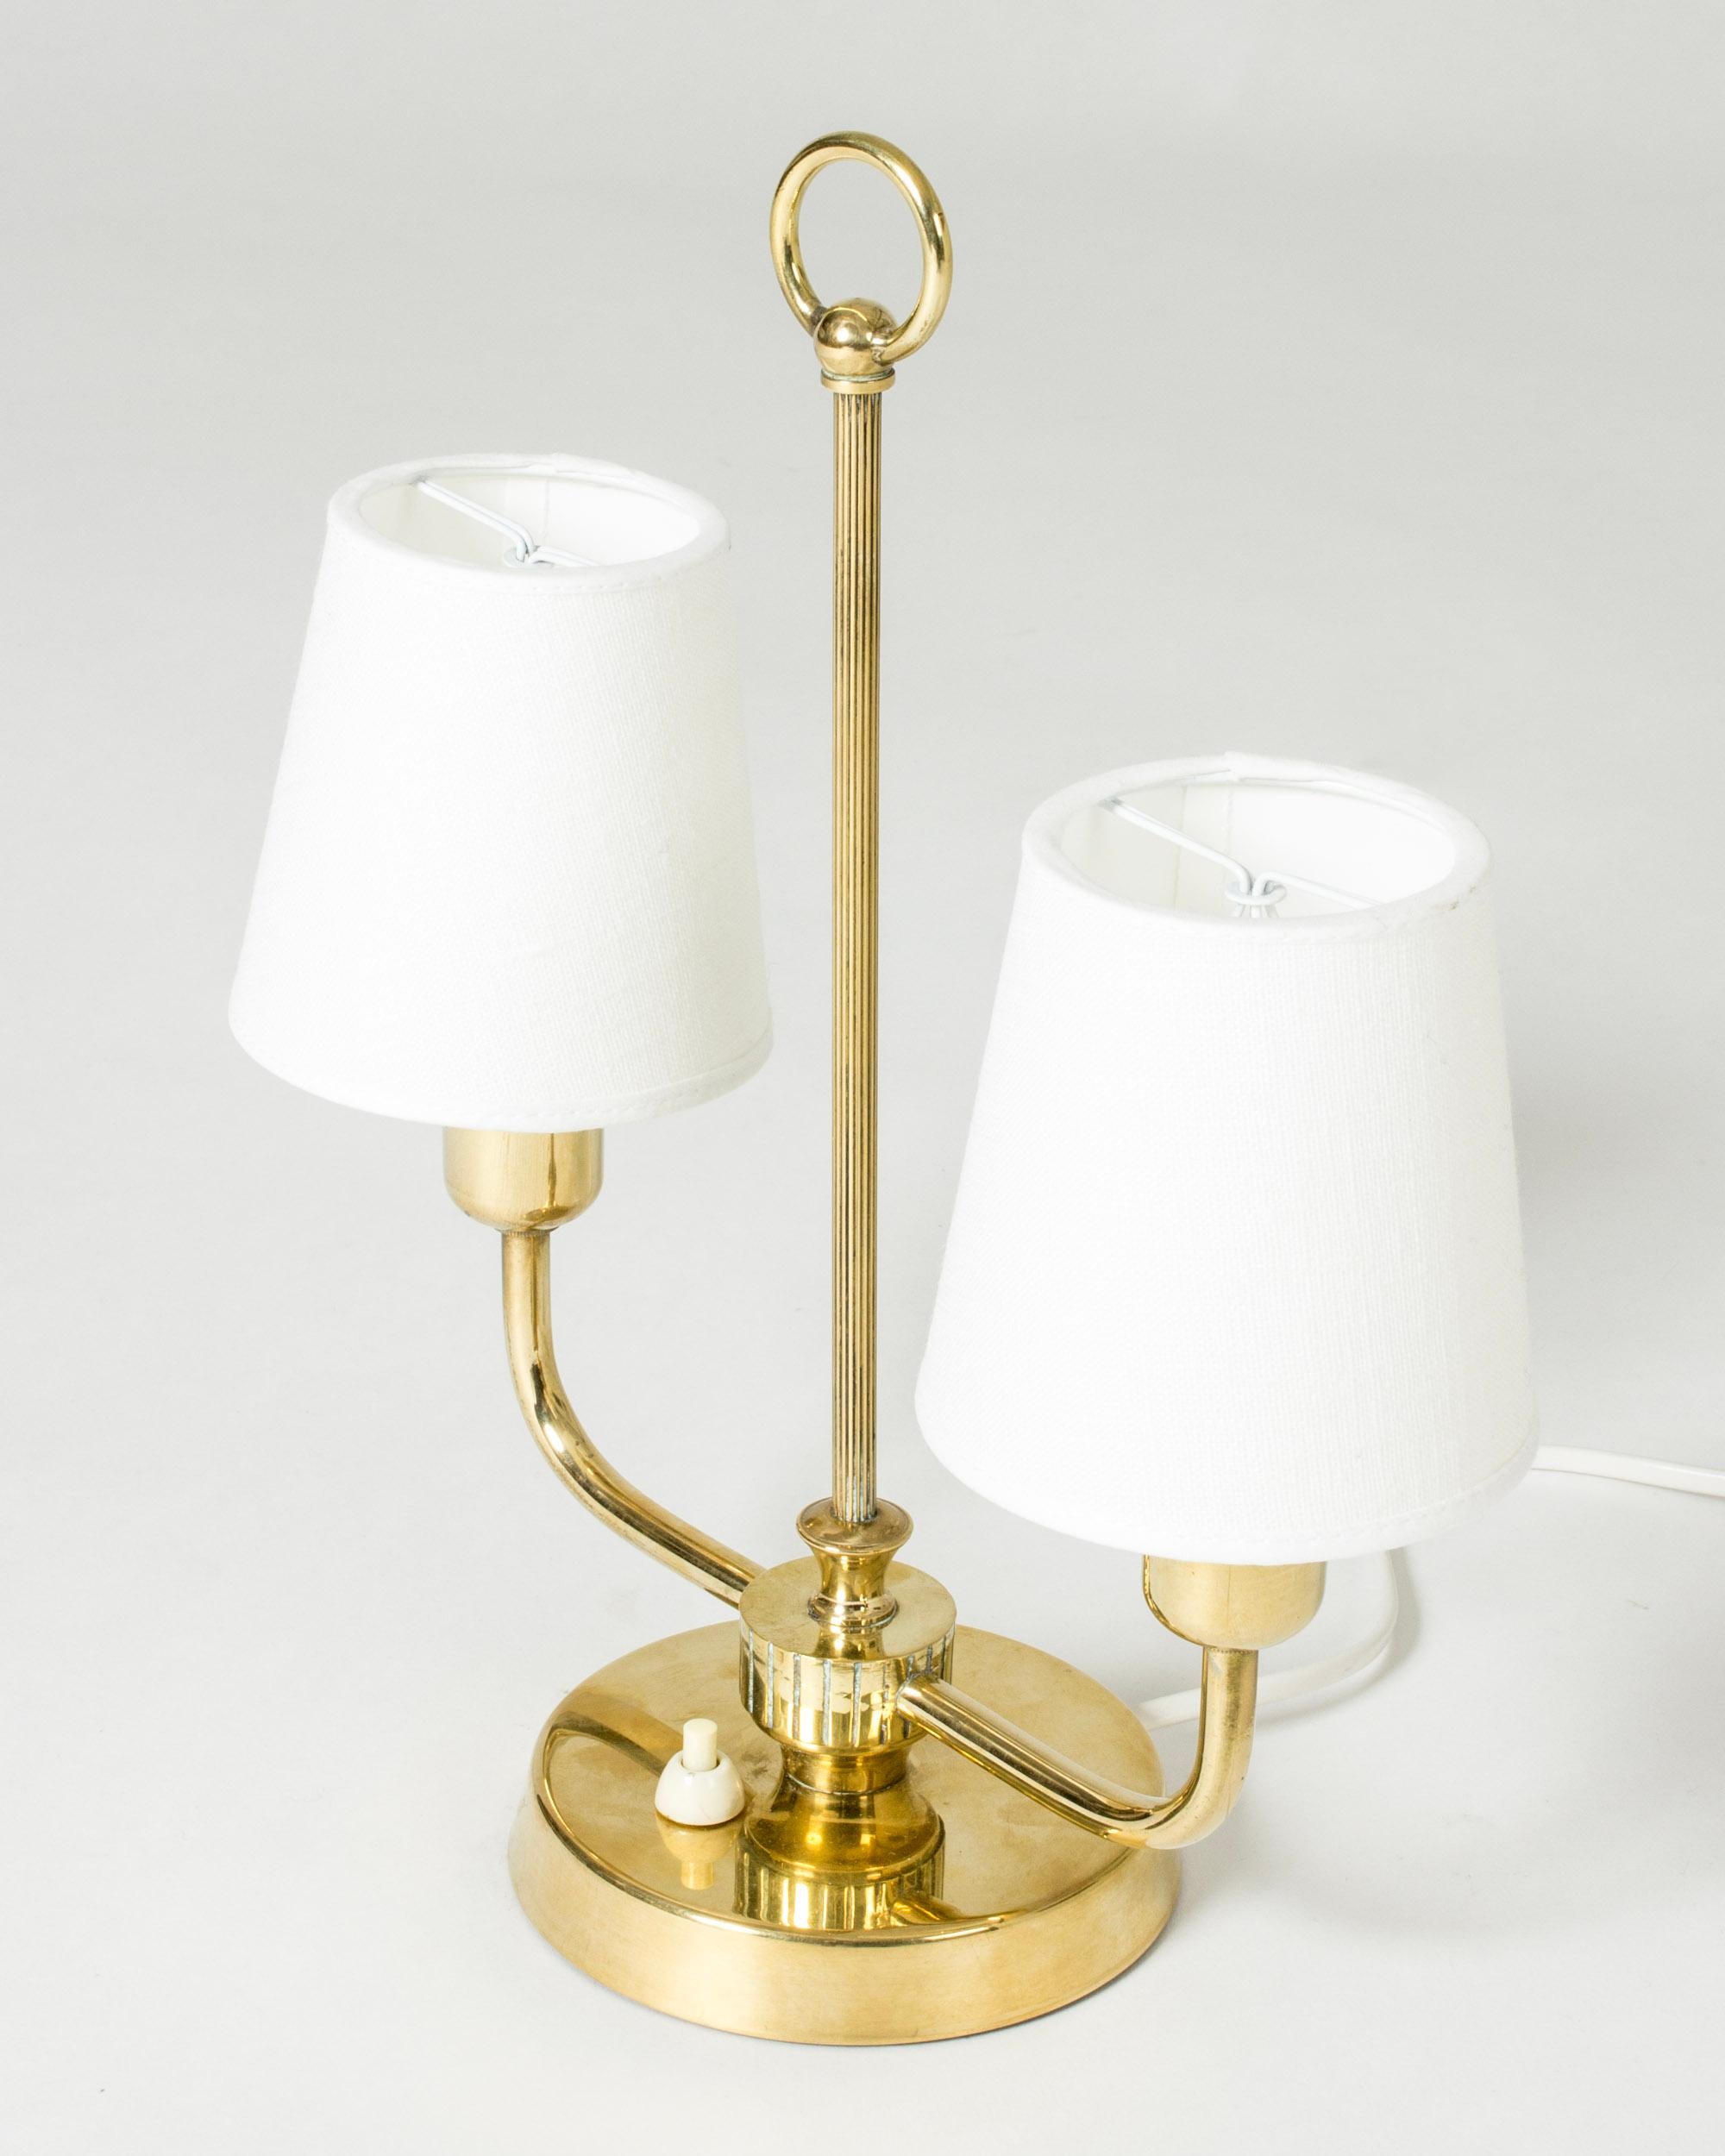 Lovely table lamp from Uppsala Armaturfabrik, made from brass. Neat size with decorative embossed stripes and a hoop at the top.